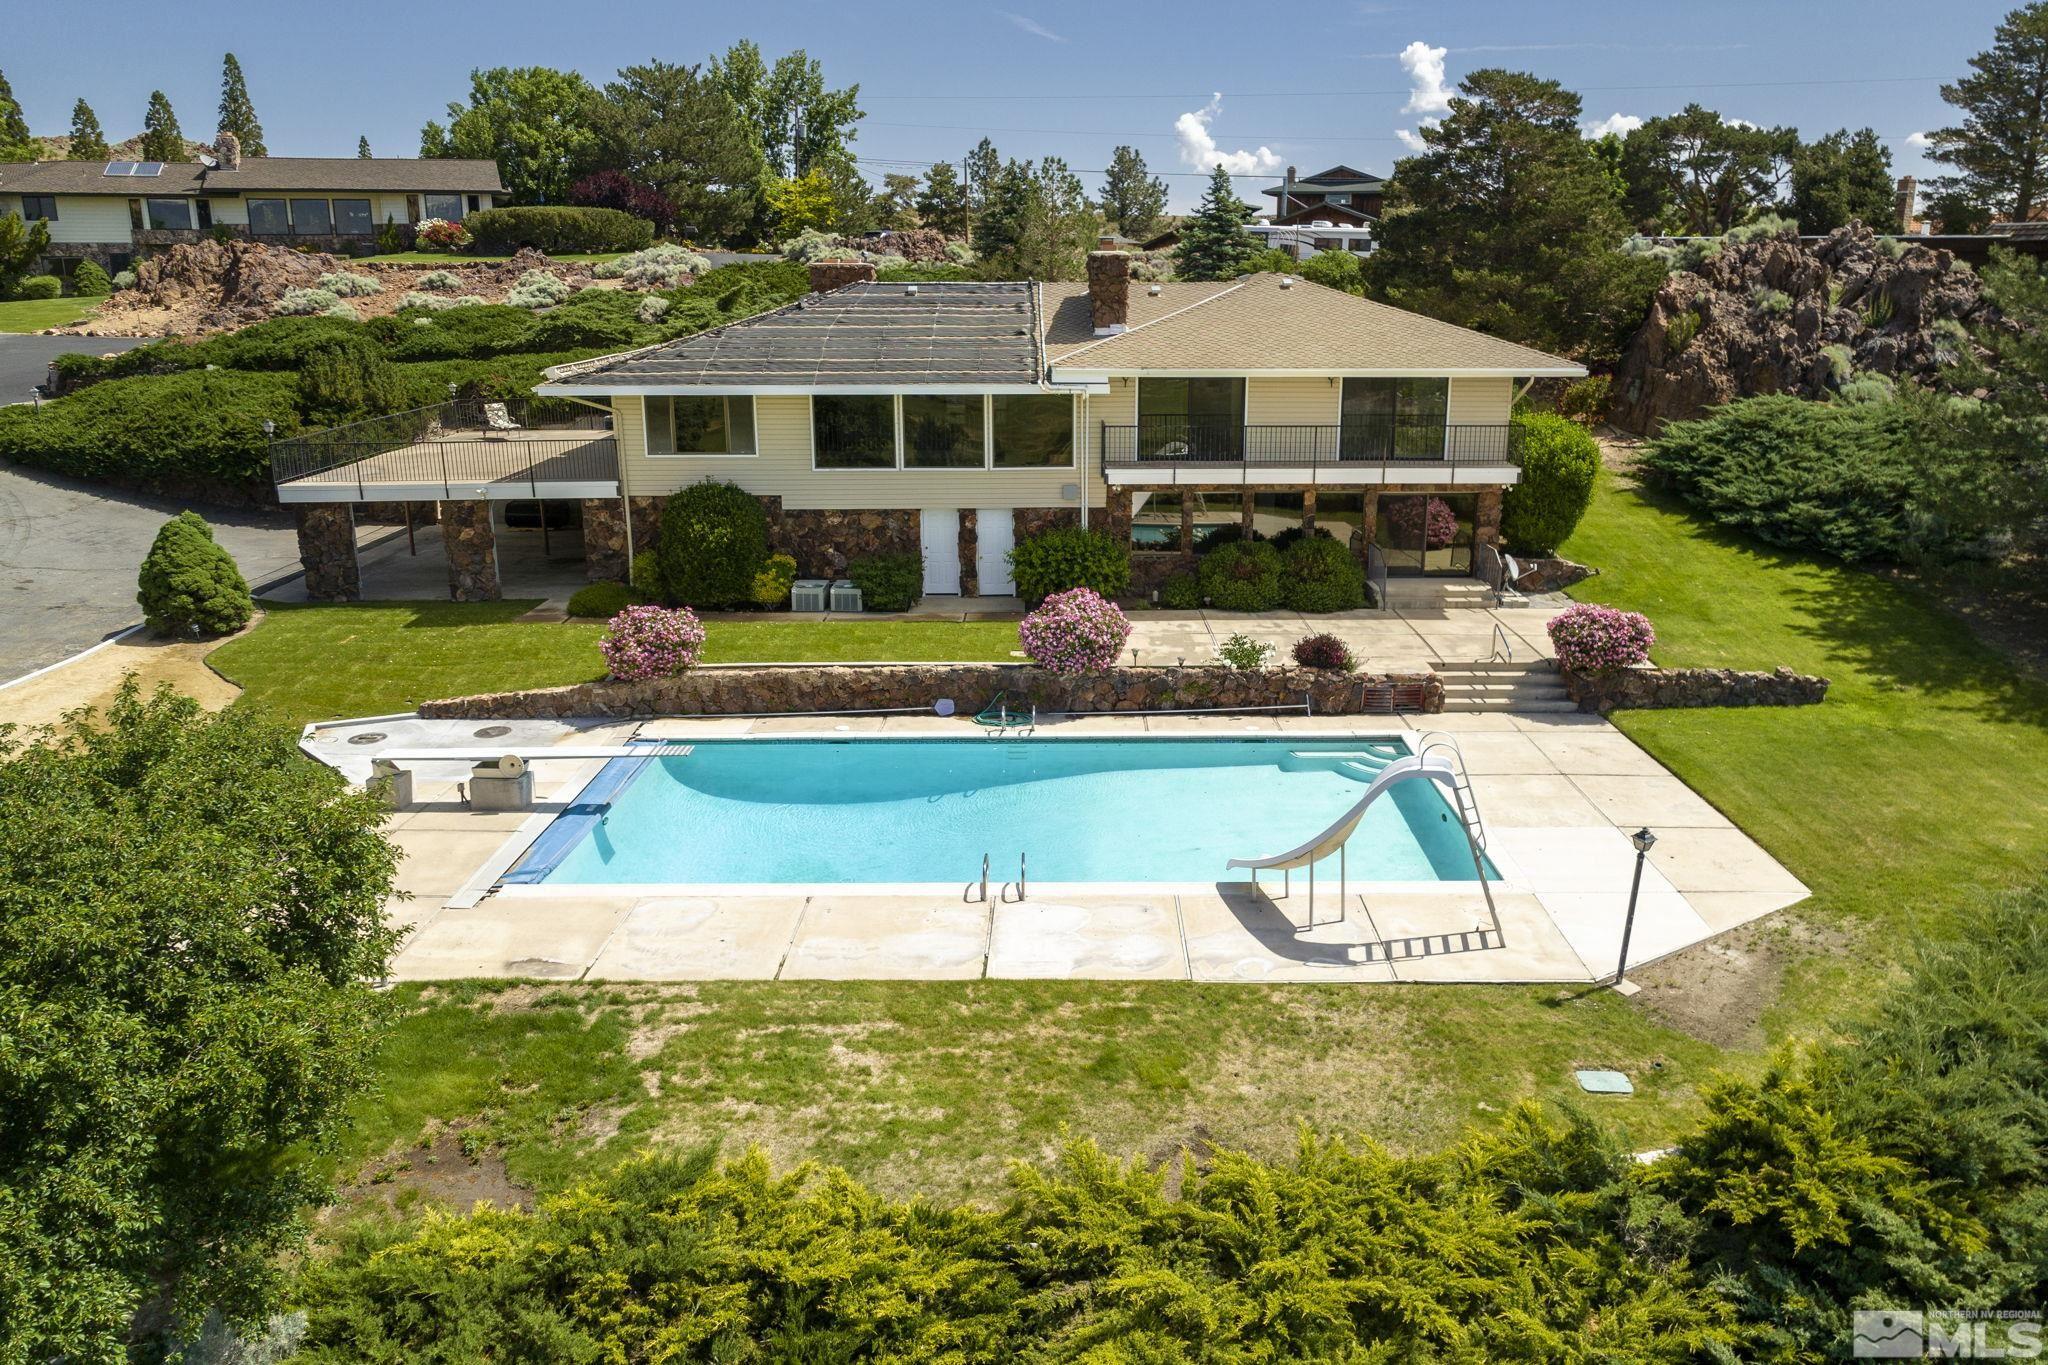 a aerial view of a house with a swimming pool patio and lake view